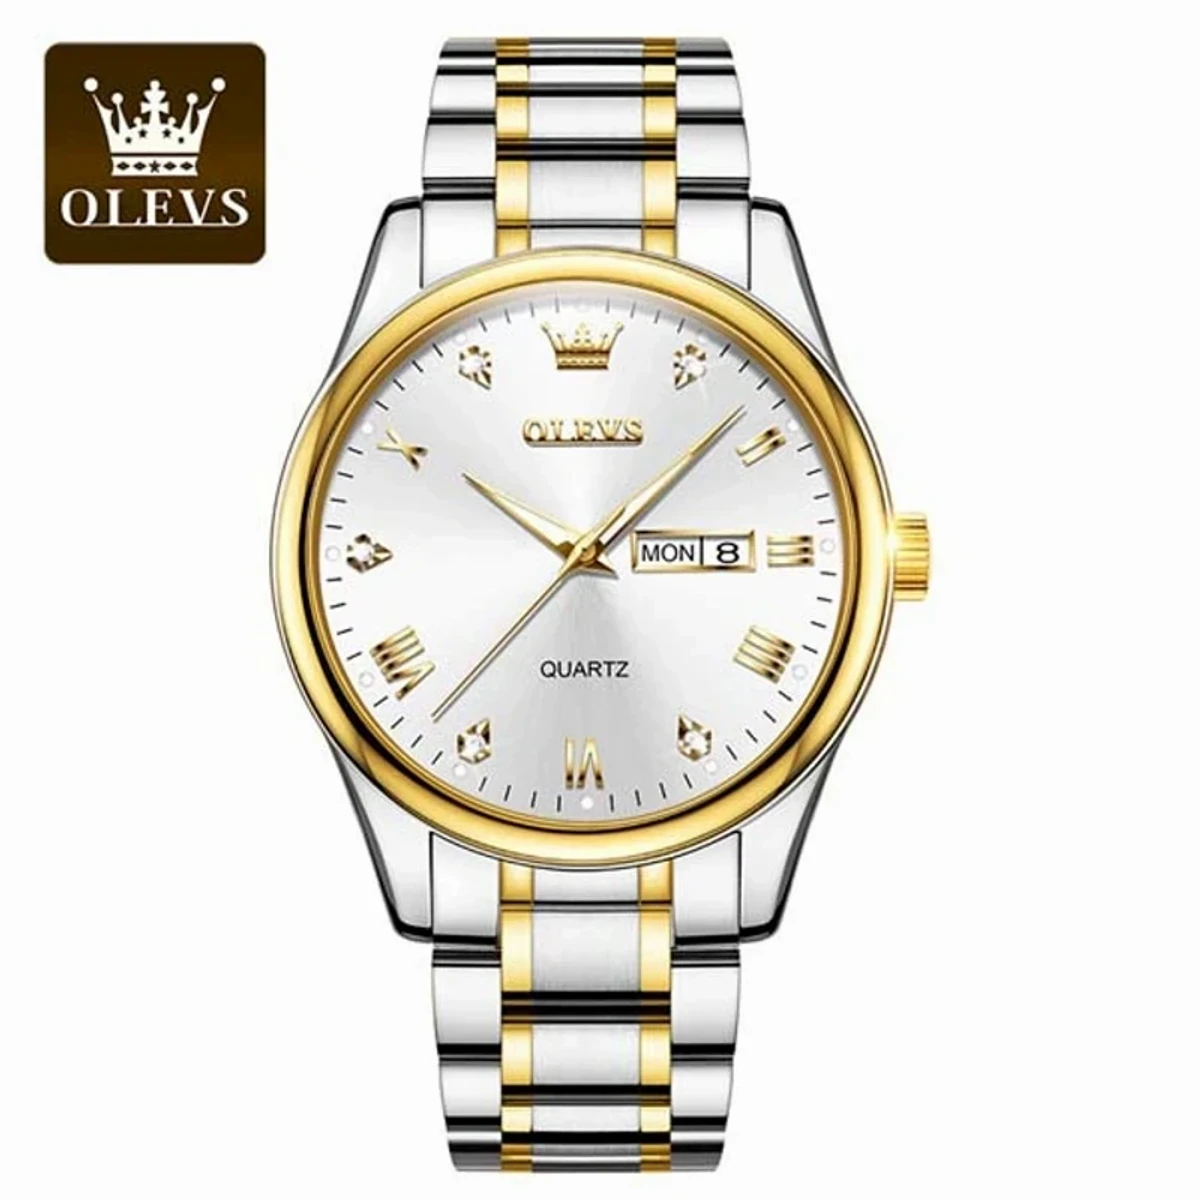 OLEVS MODEL 5563 TOP BRAND OLEVS MENS CLASSIC QUARTZ STAINLESS STEEL WATCH OLEVS MAN 5563 TOTON AR WHITE DIAL